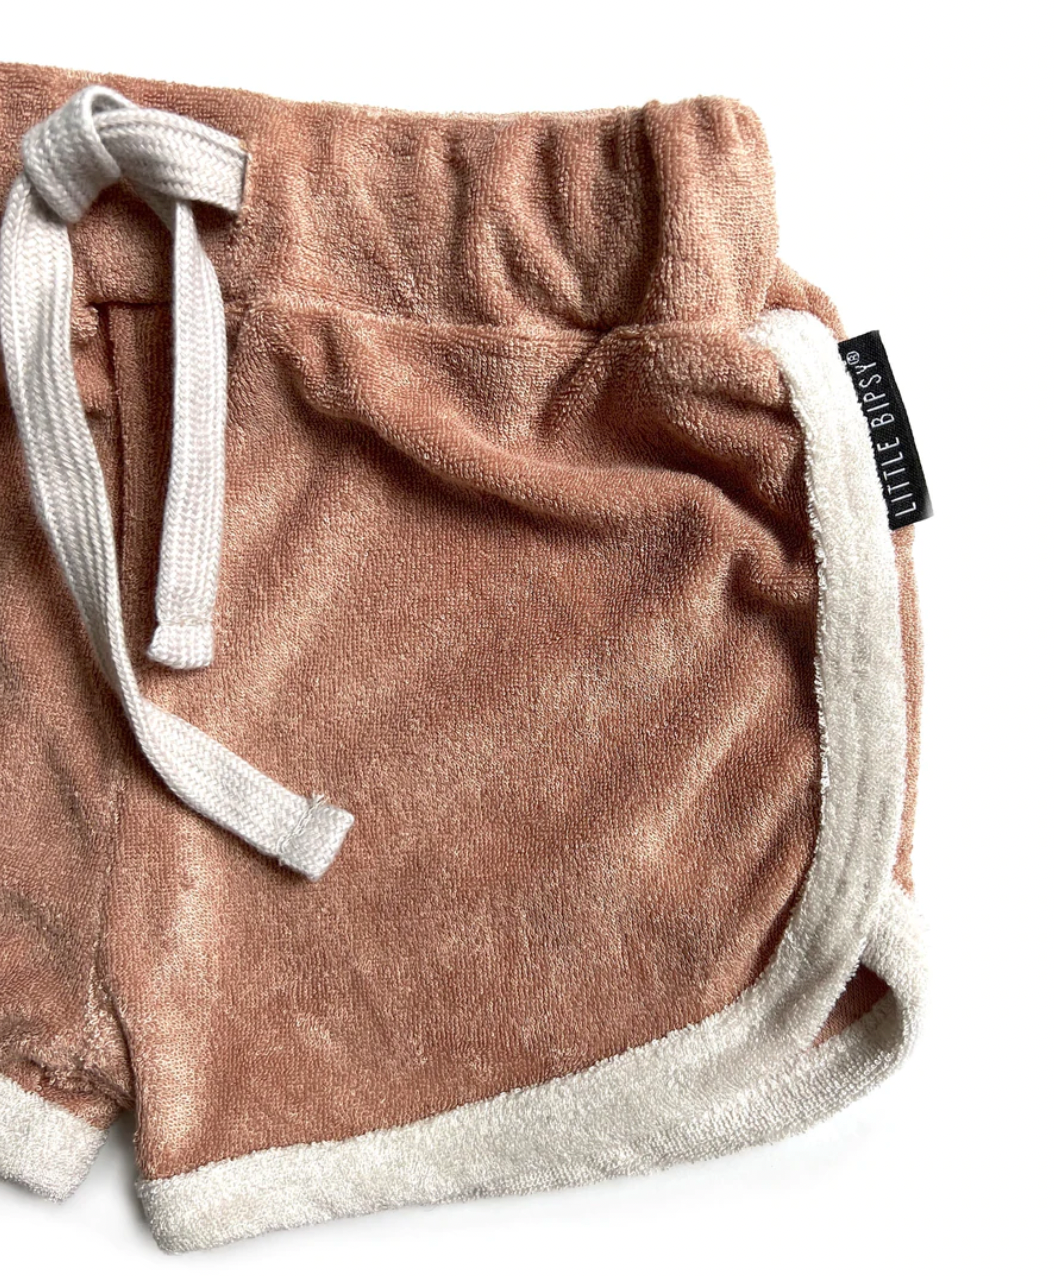 Little Bipsy - Terry Cloth Track Shorts in Cinnamon